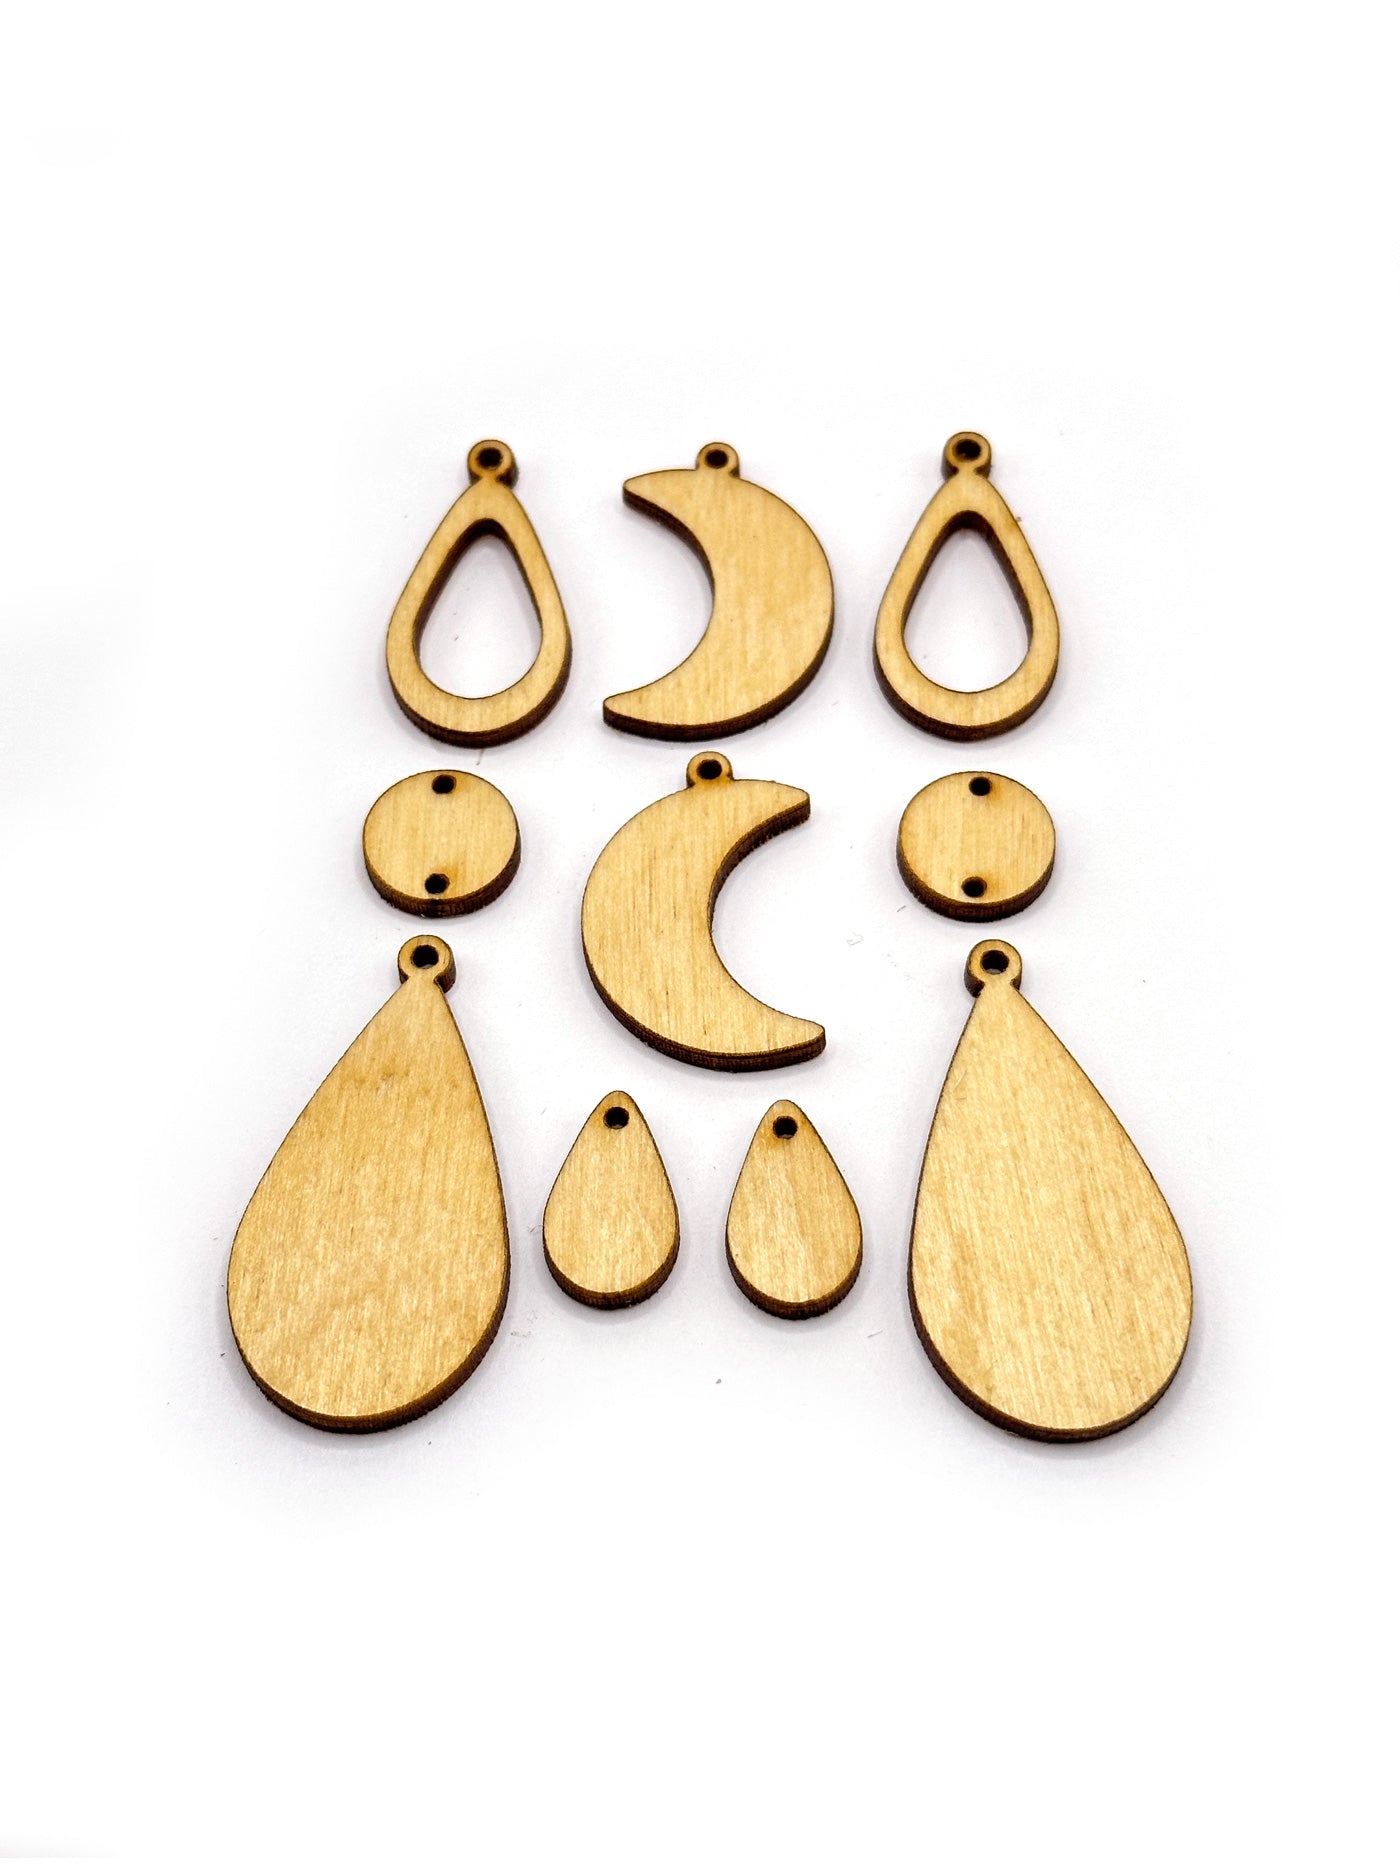 10pcs Fashion yellow round earrings gold circle accessories Woman